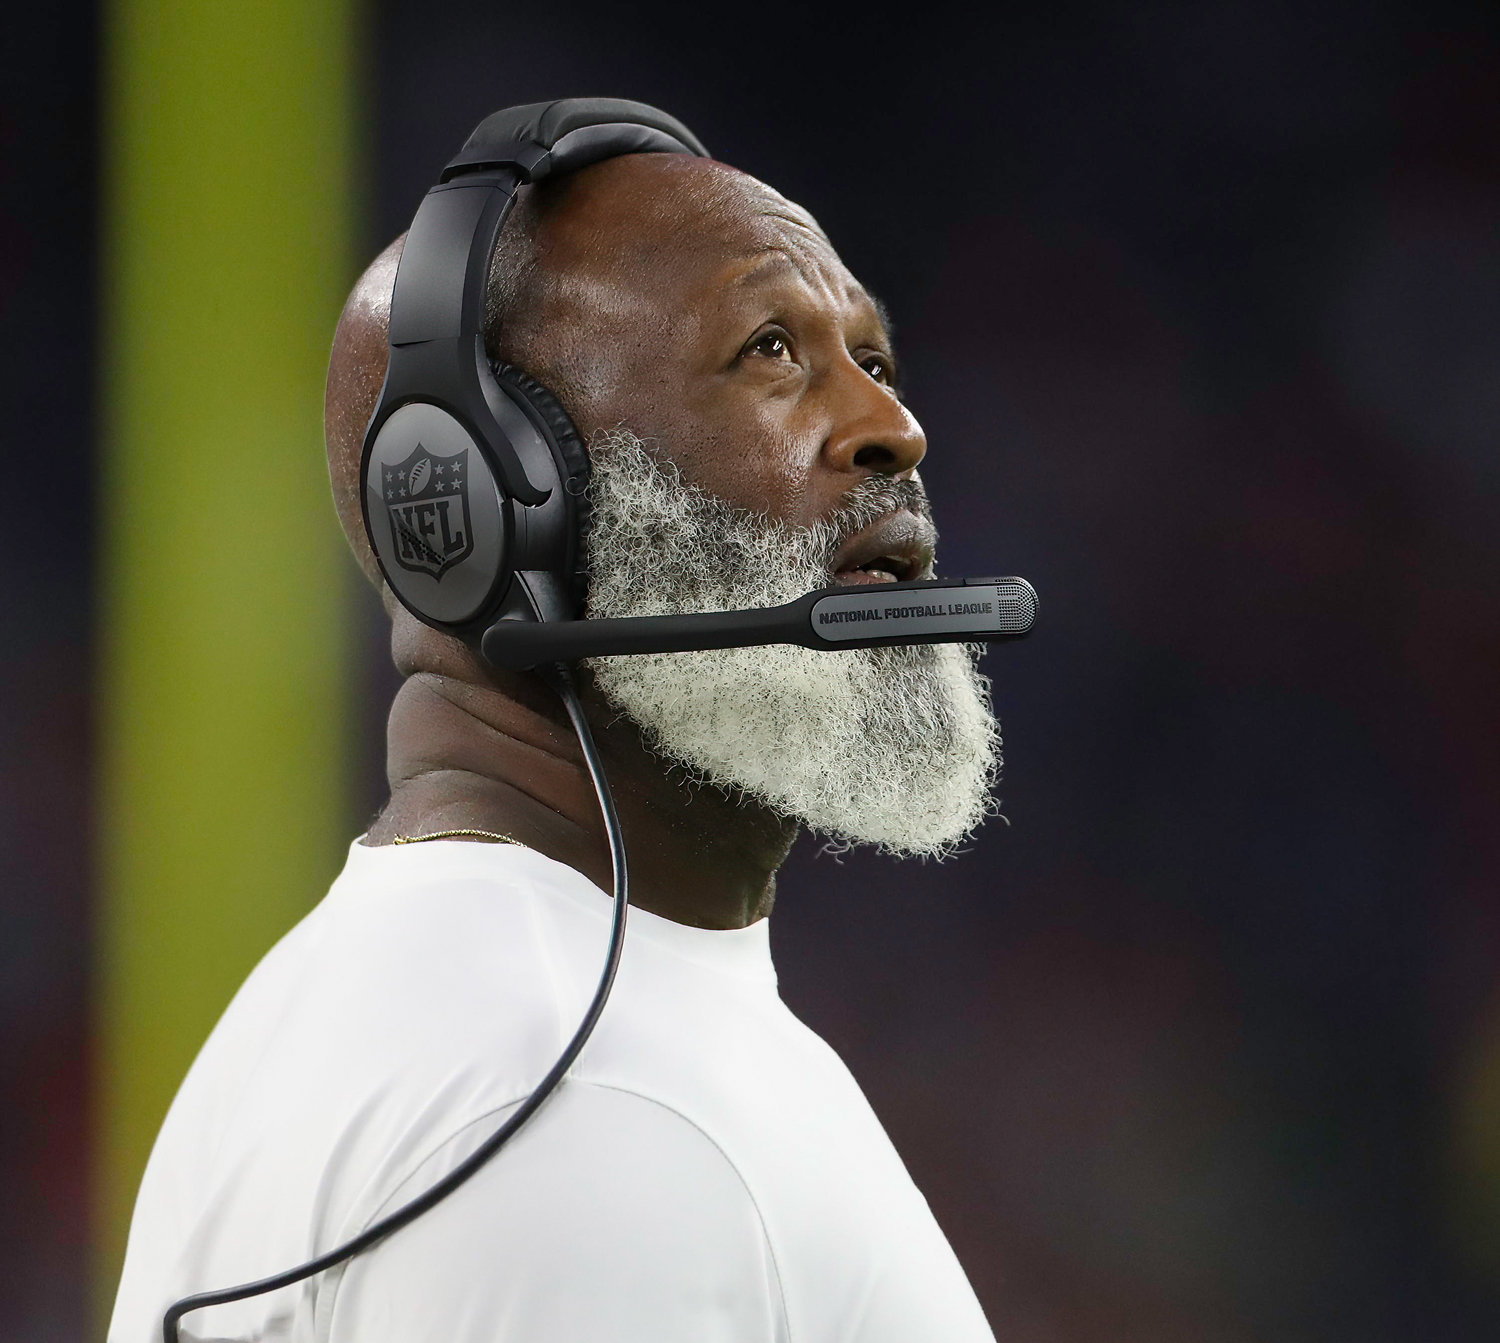 Houston Texans head coach Lovie Smith during an NFL preseason game between the Texans and the 49ers in Houston, Texas, on August 25, 2022.